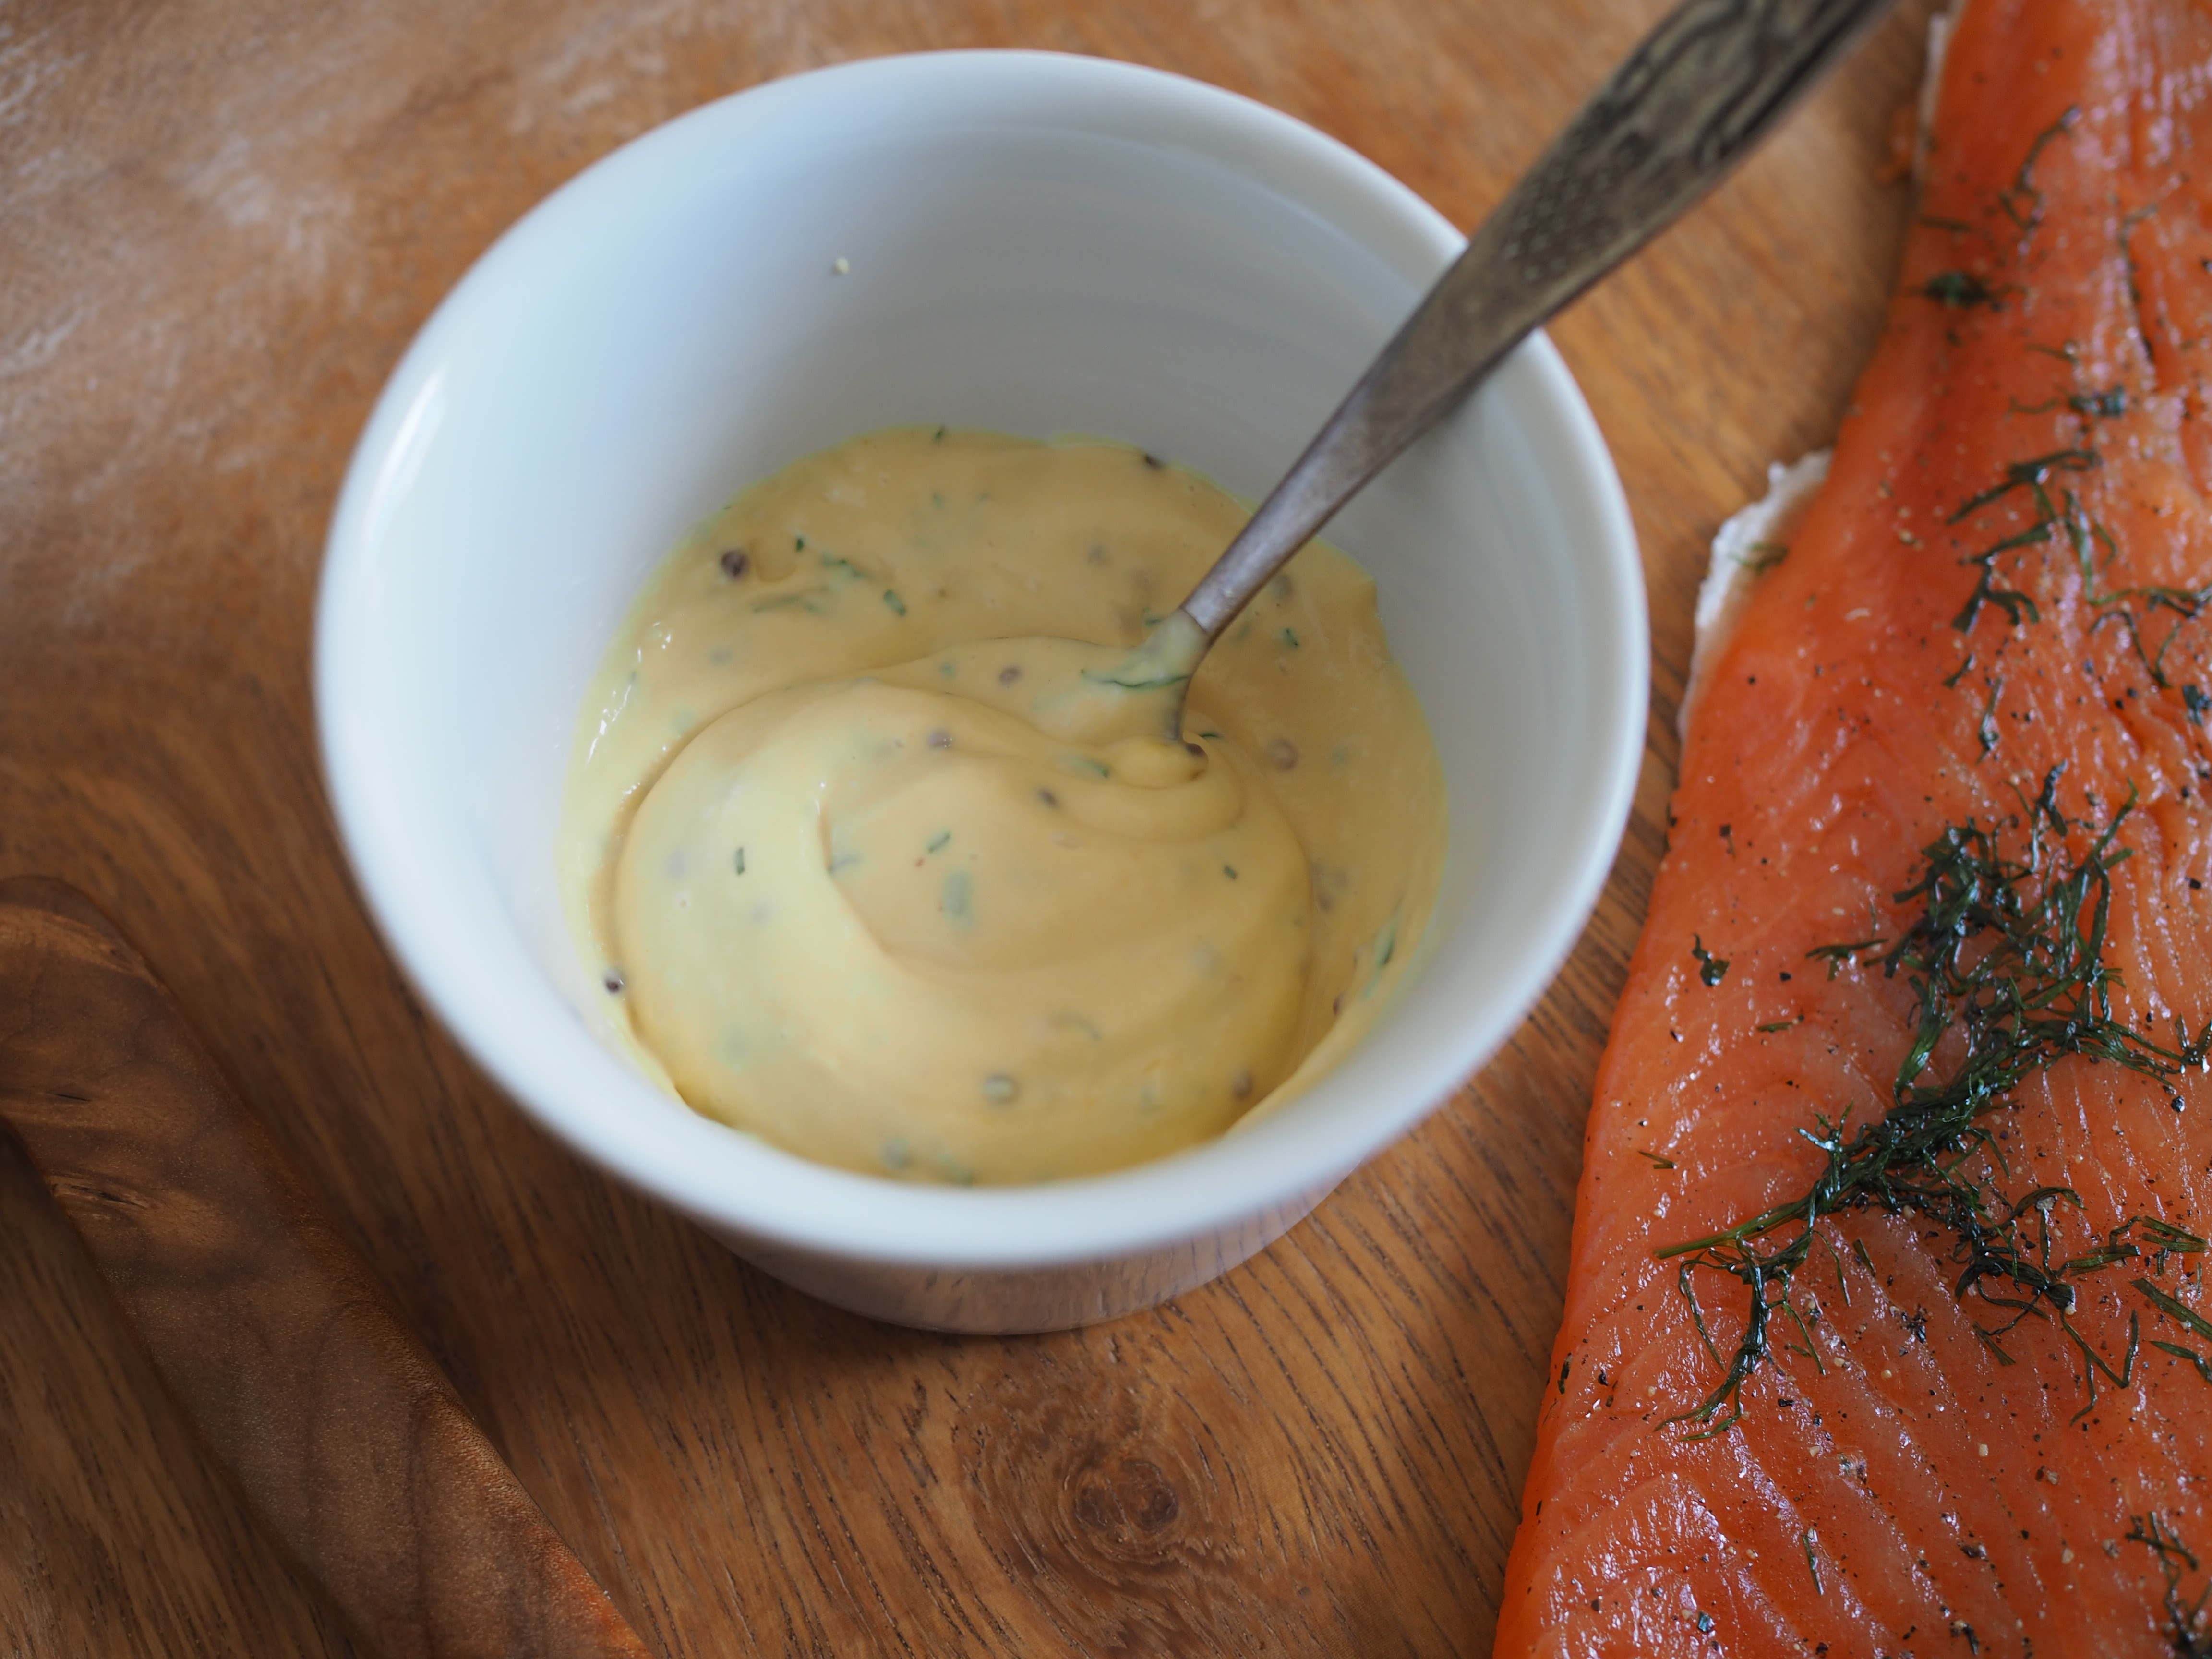 Norwegian gravlax with dill-stewed potatoes and served with a classic mustard sauce (Gravlaks med sennepssaus og dillstuede poteter)